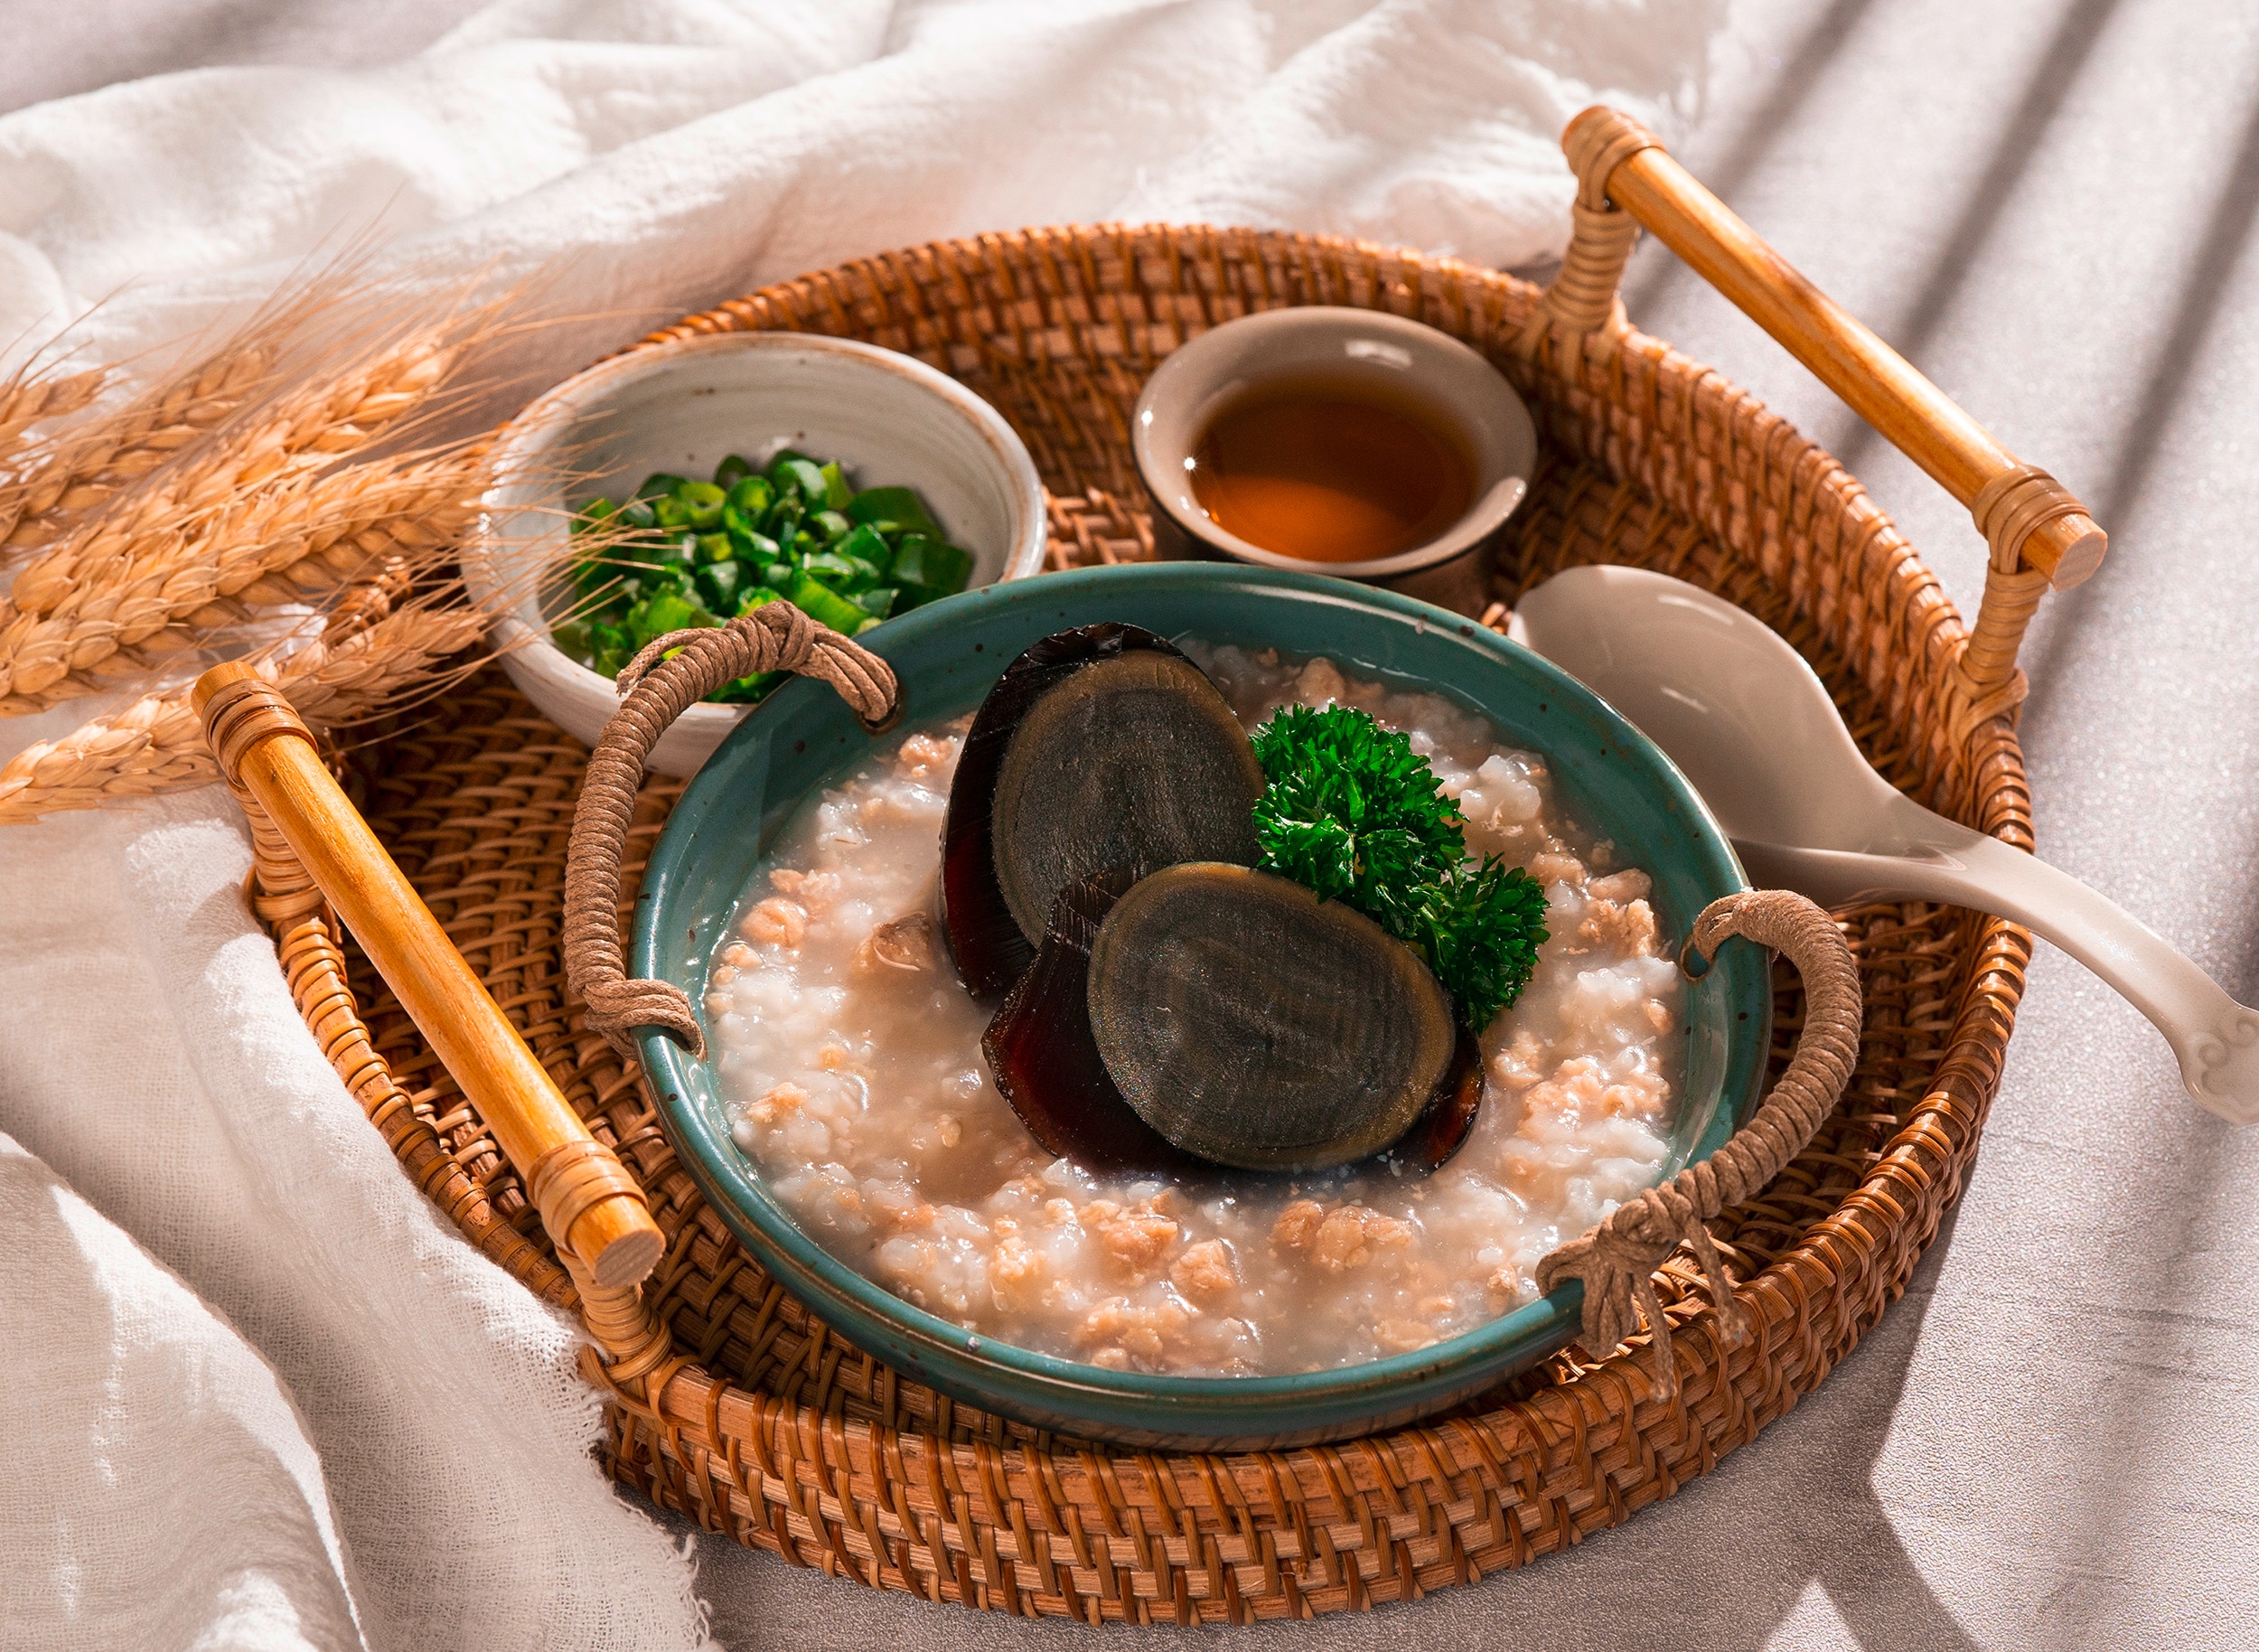 Chunky congee with halves of century eggs served on a round wicker tray